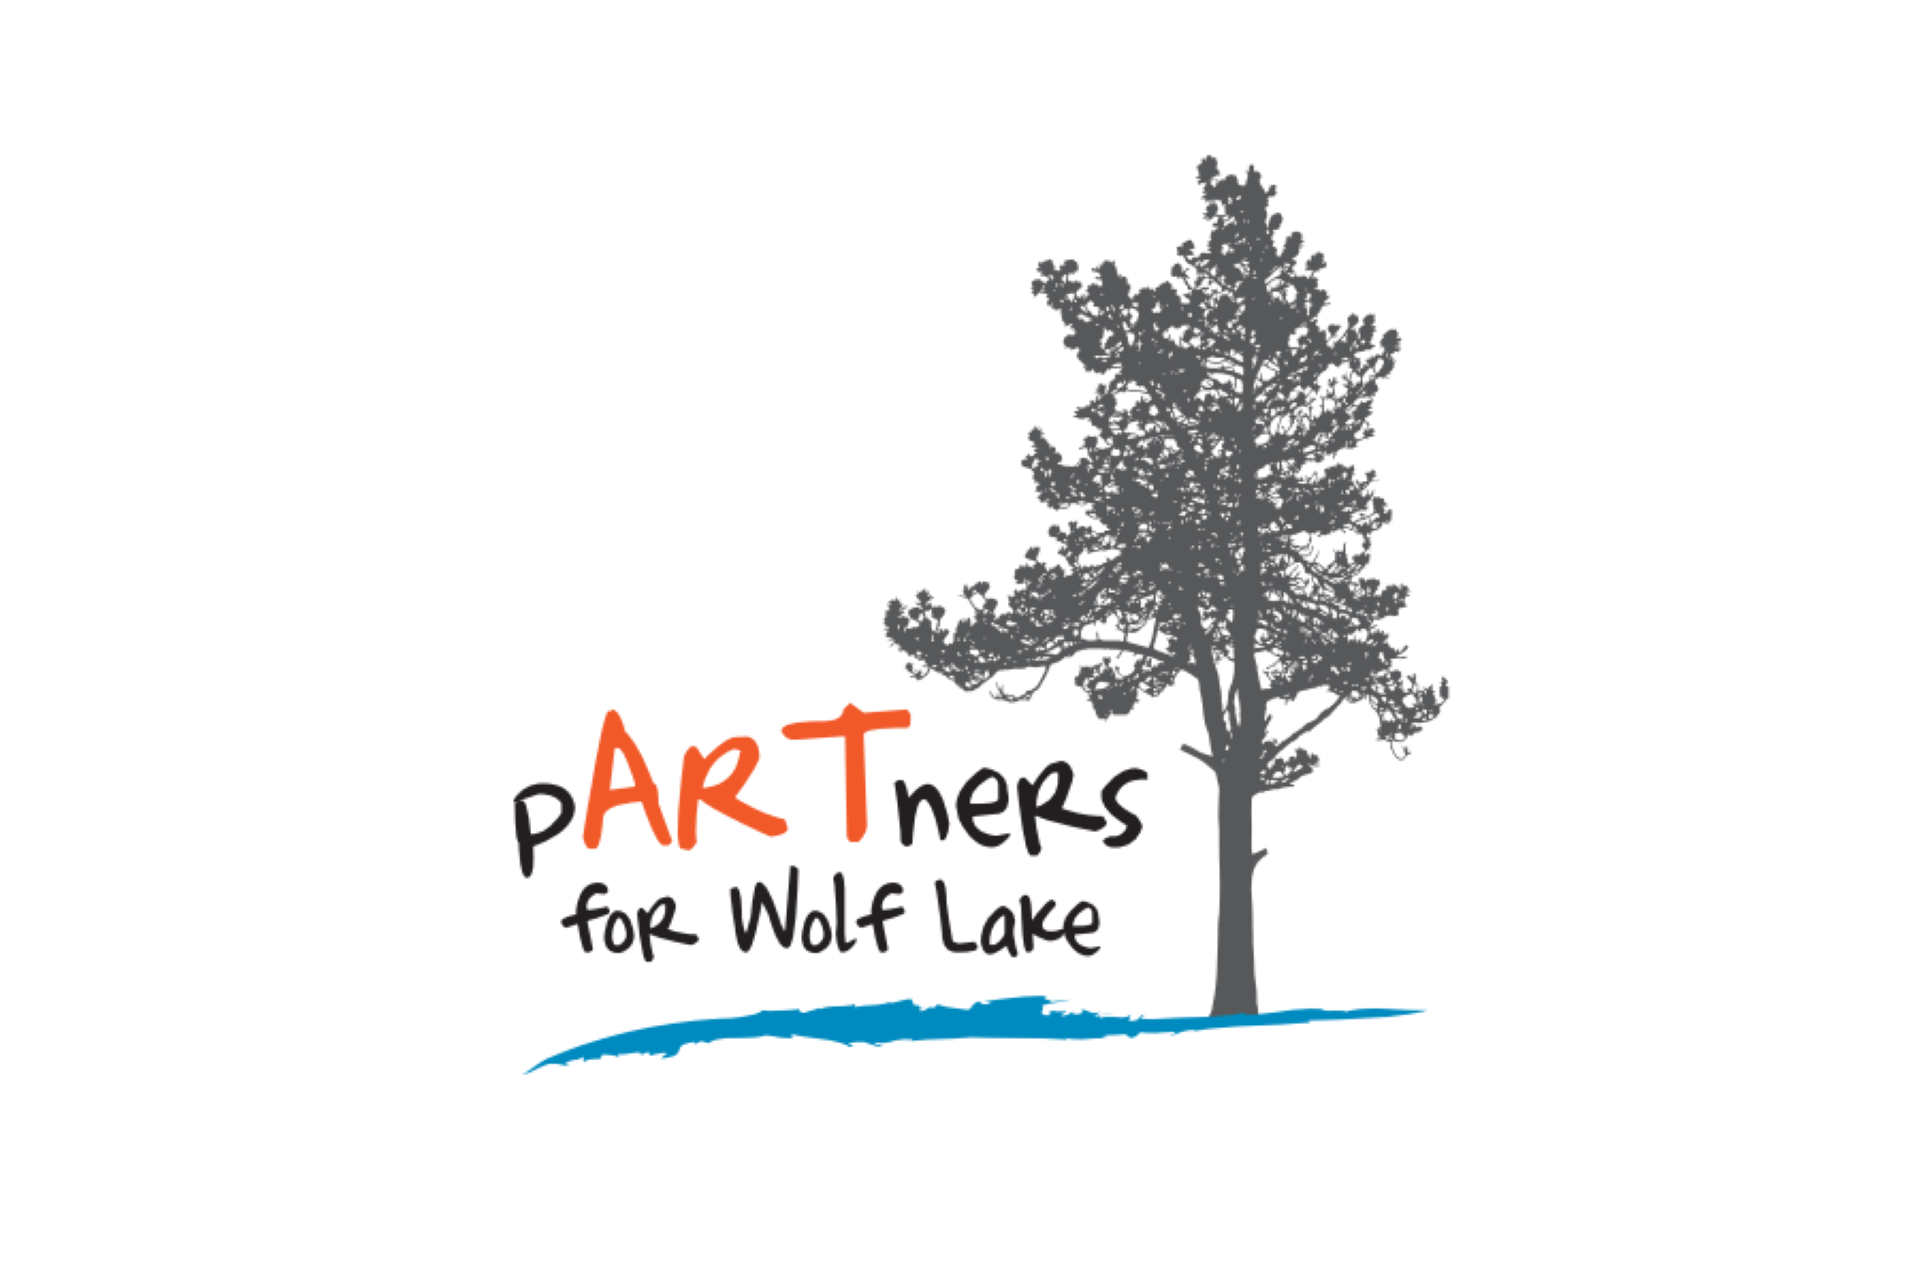 logo for the pArtners for wolf lake